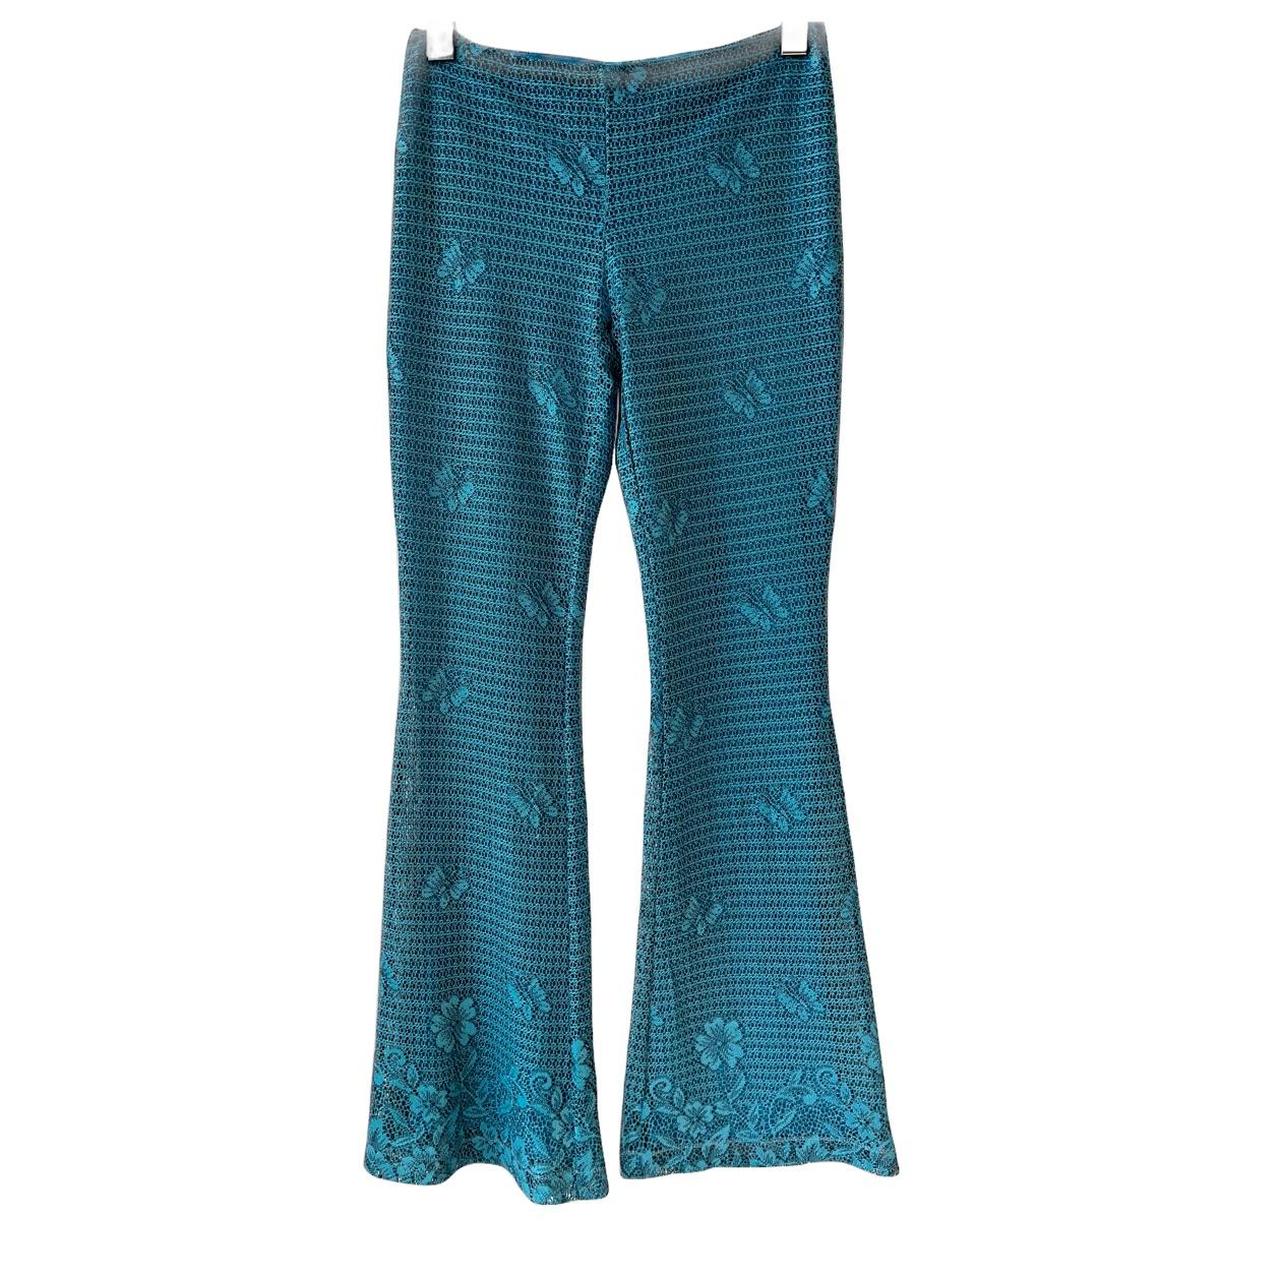 Embroidered Slim Flare Leg Trousers -Turquoise Blue